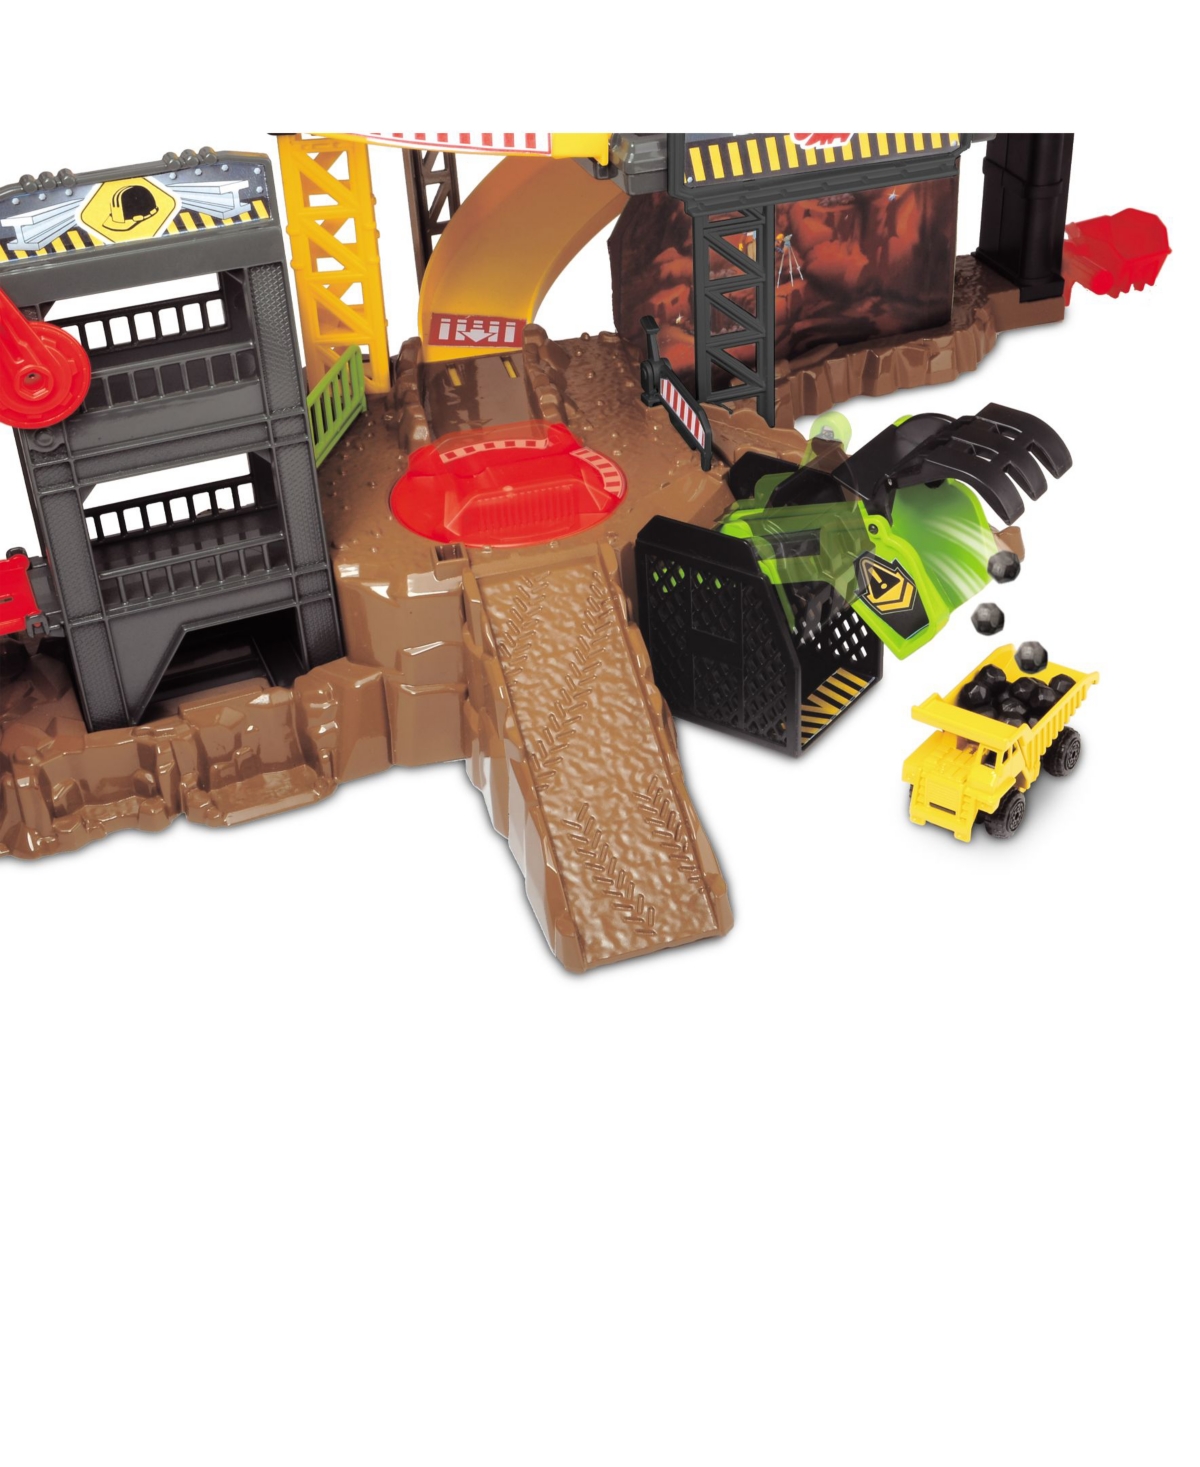 Shop Dickie Toys Hk Ltd Dickie Toys Construction Playset With 4 Die-cast Cars In Yellow